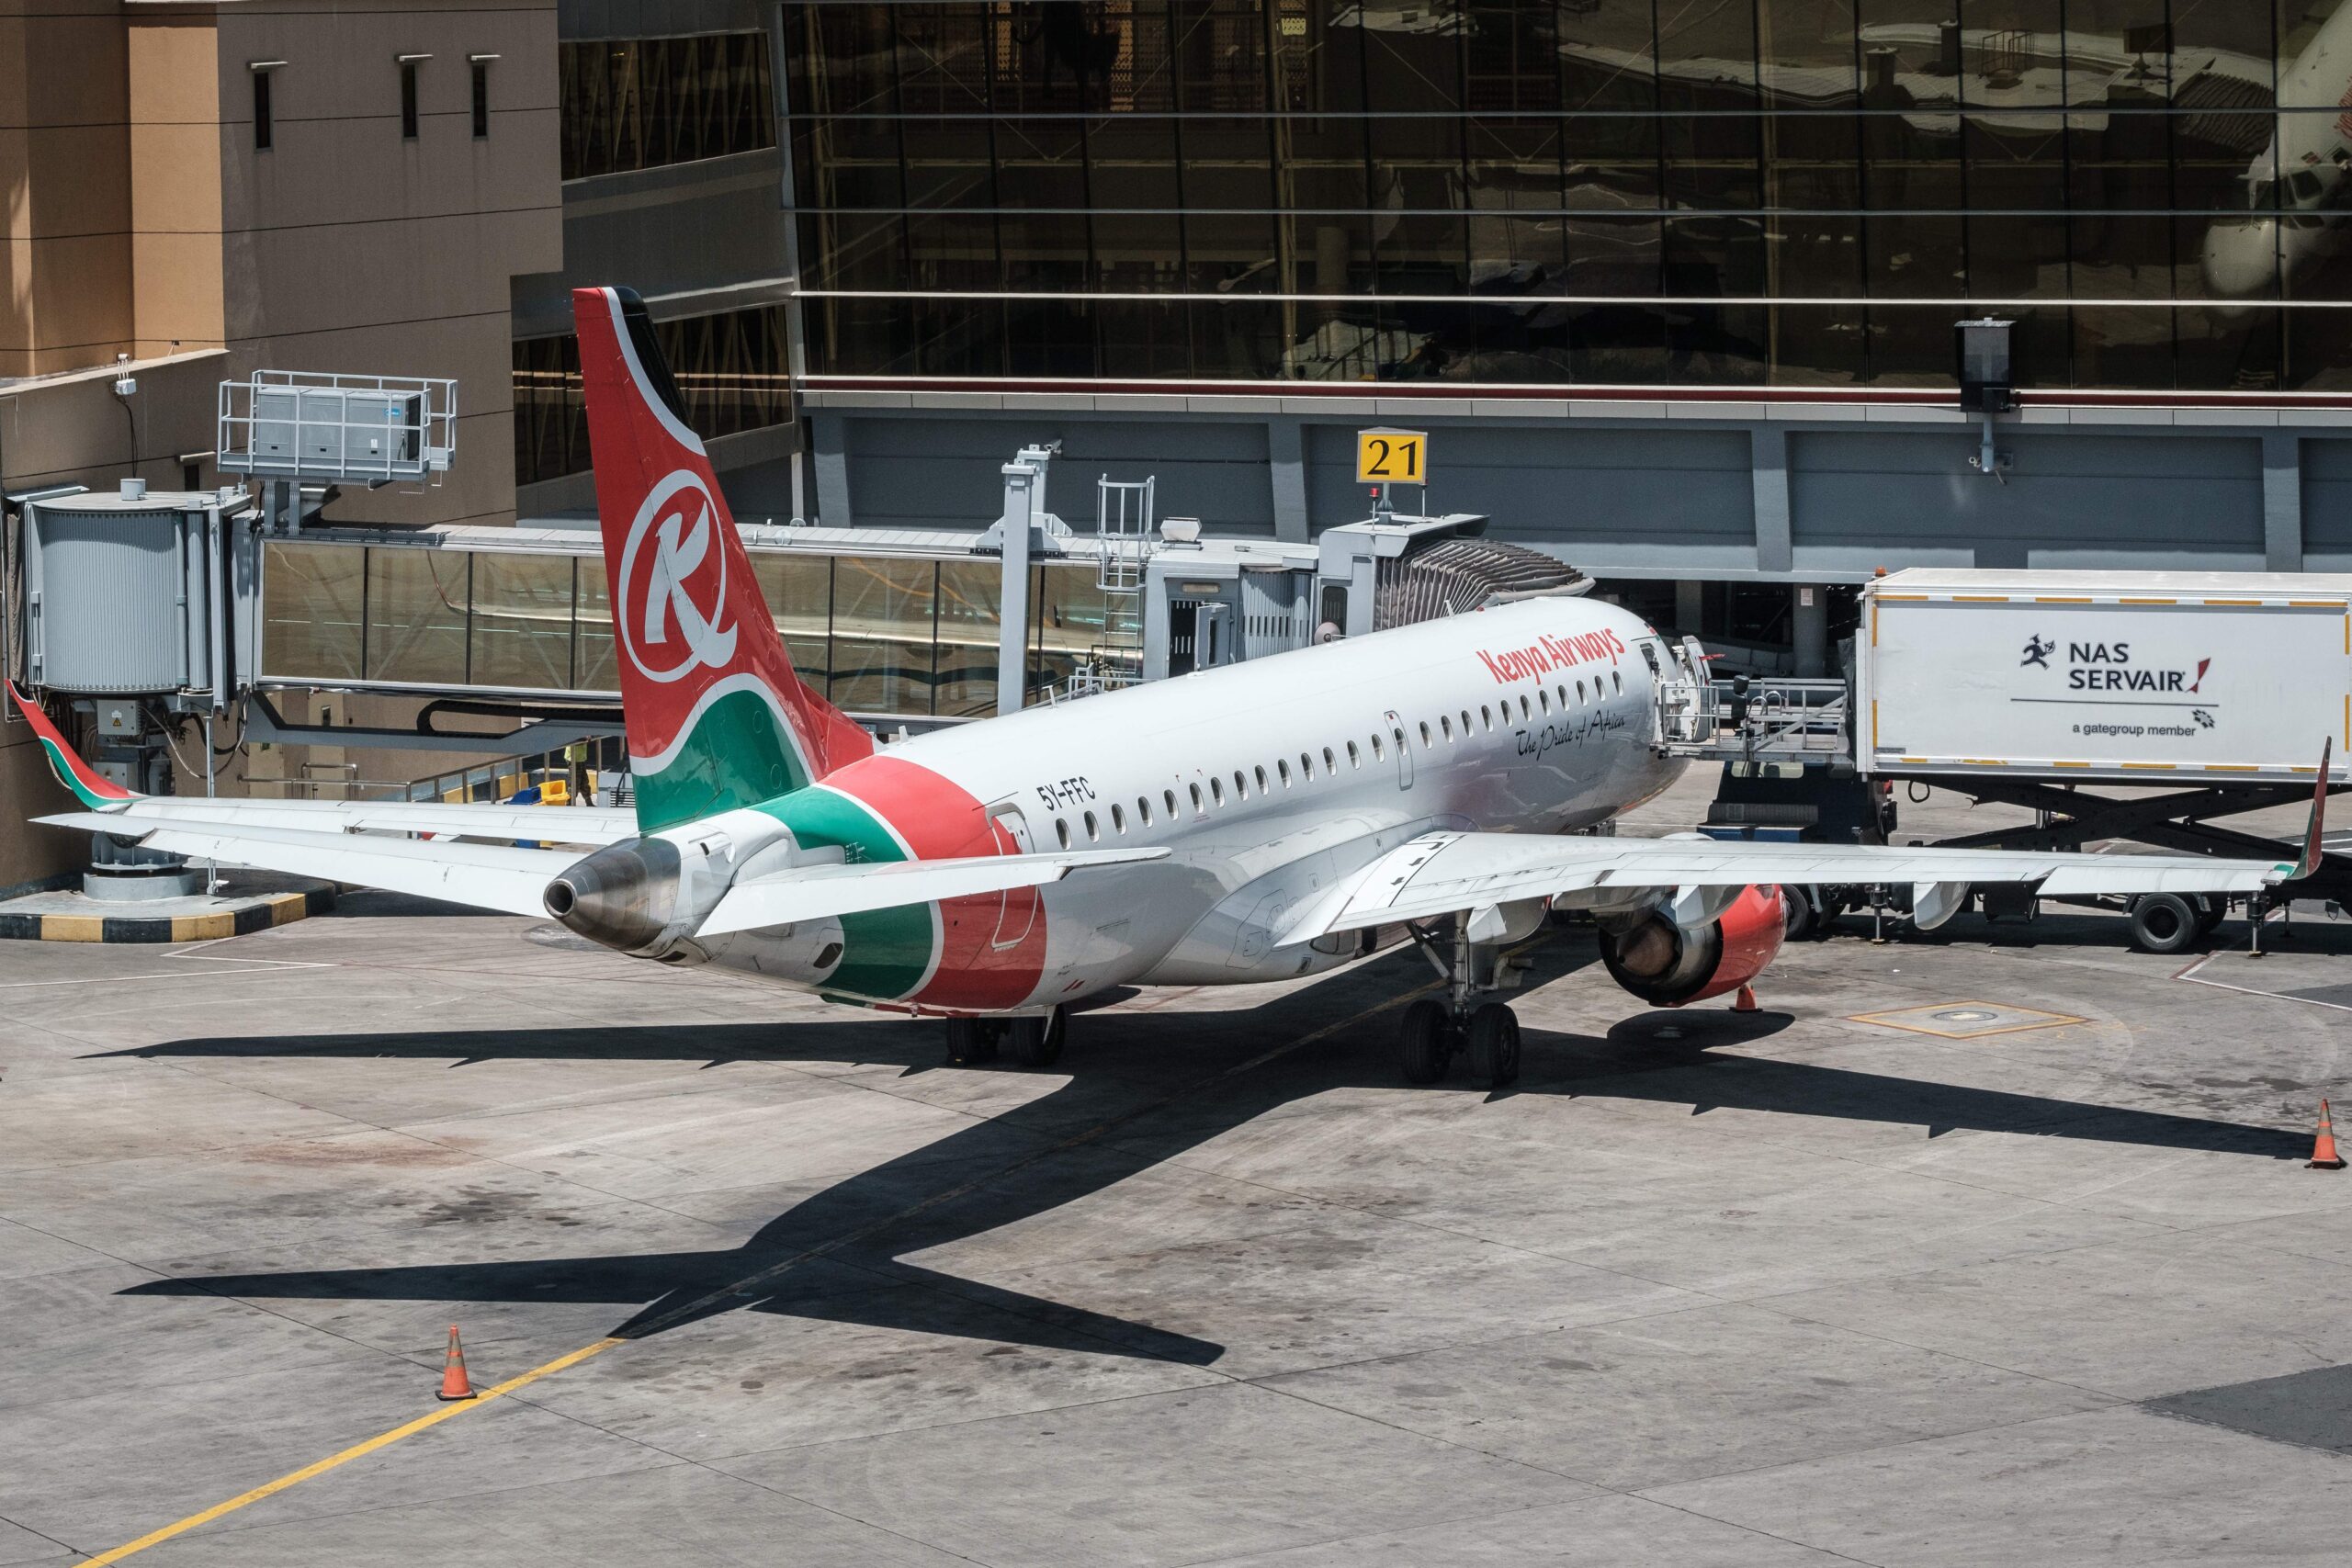 Kenya Airways Is Reportedly Withholding Pay In Pilot Wage Row